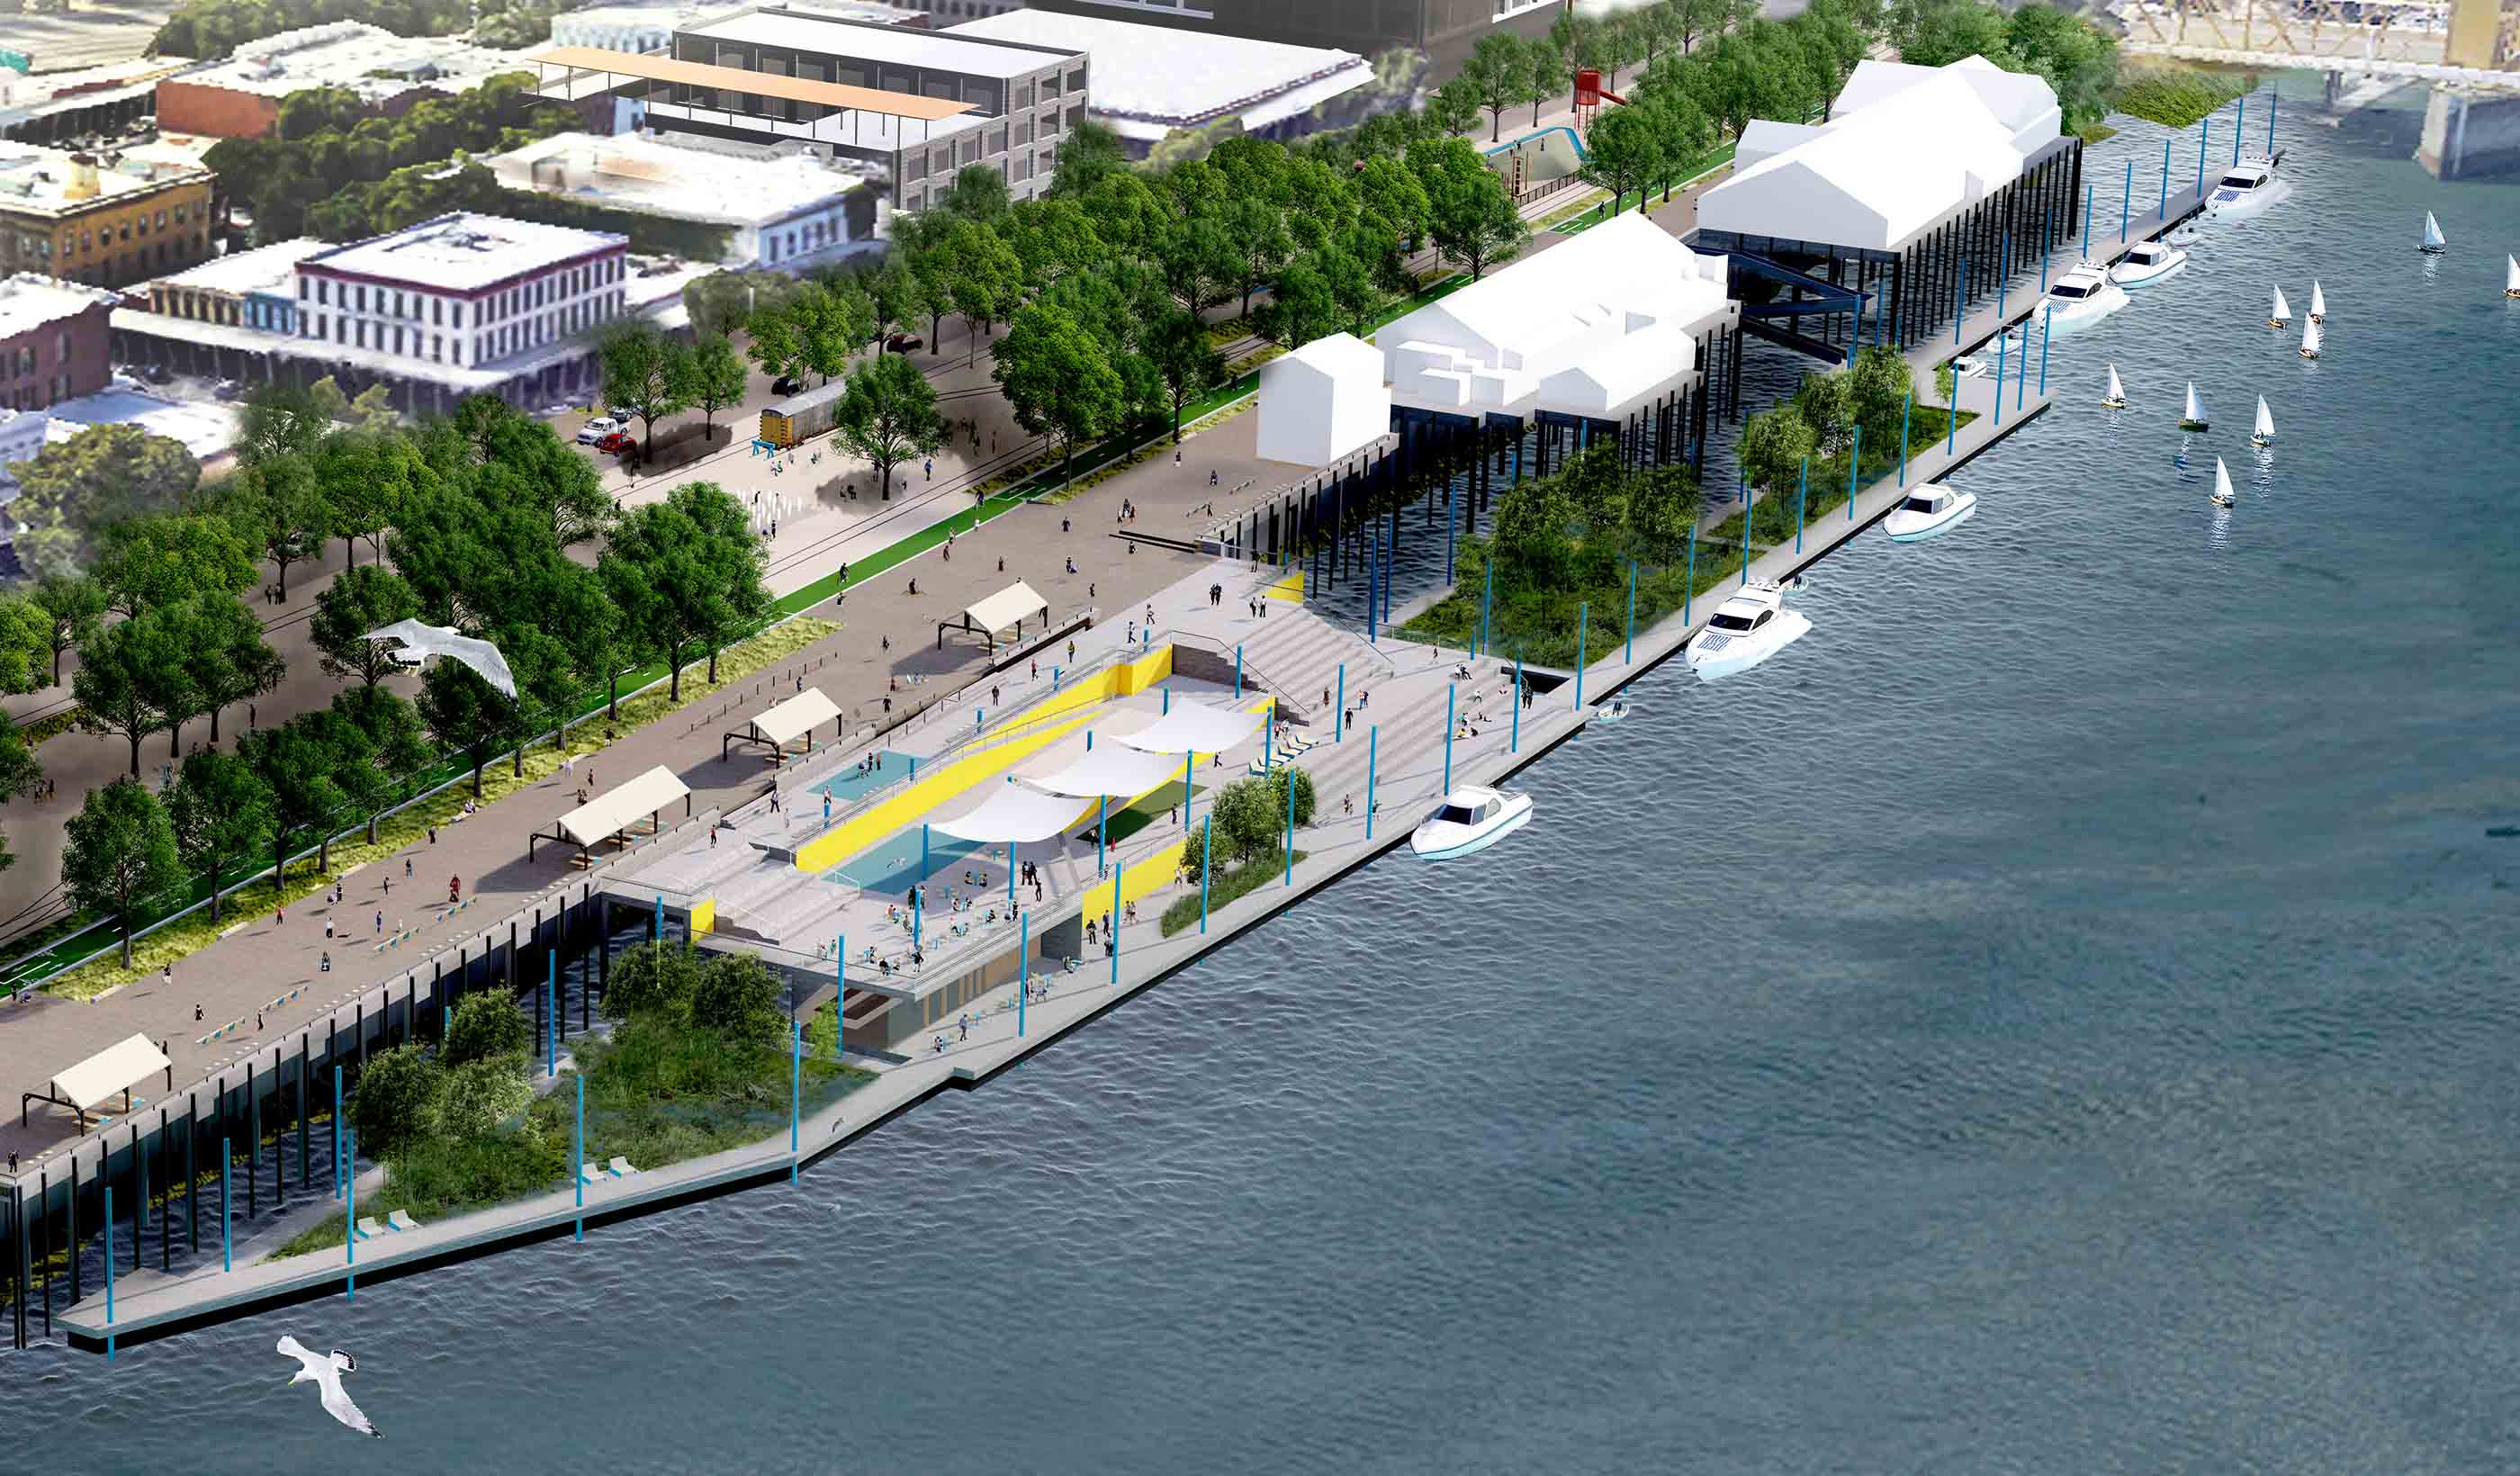 City-scale amenities give Sacramento its waterfront back